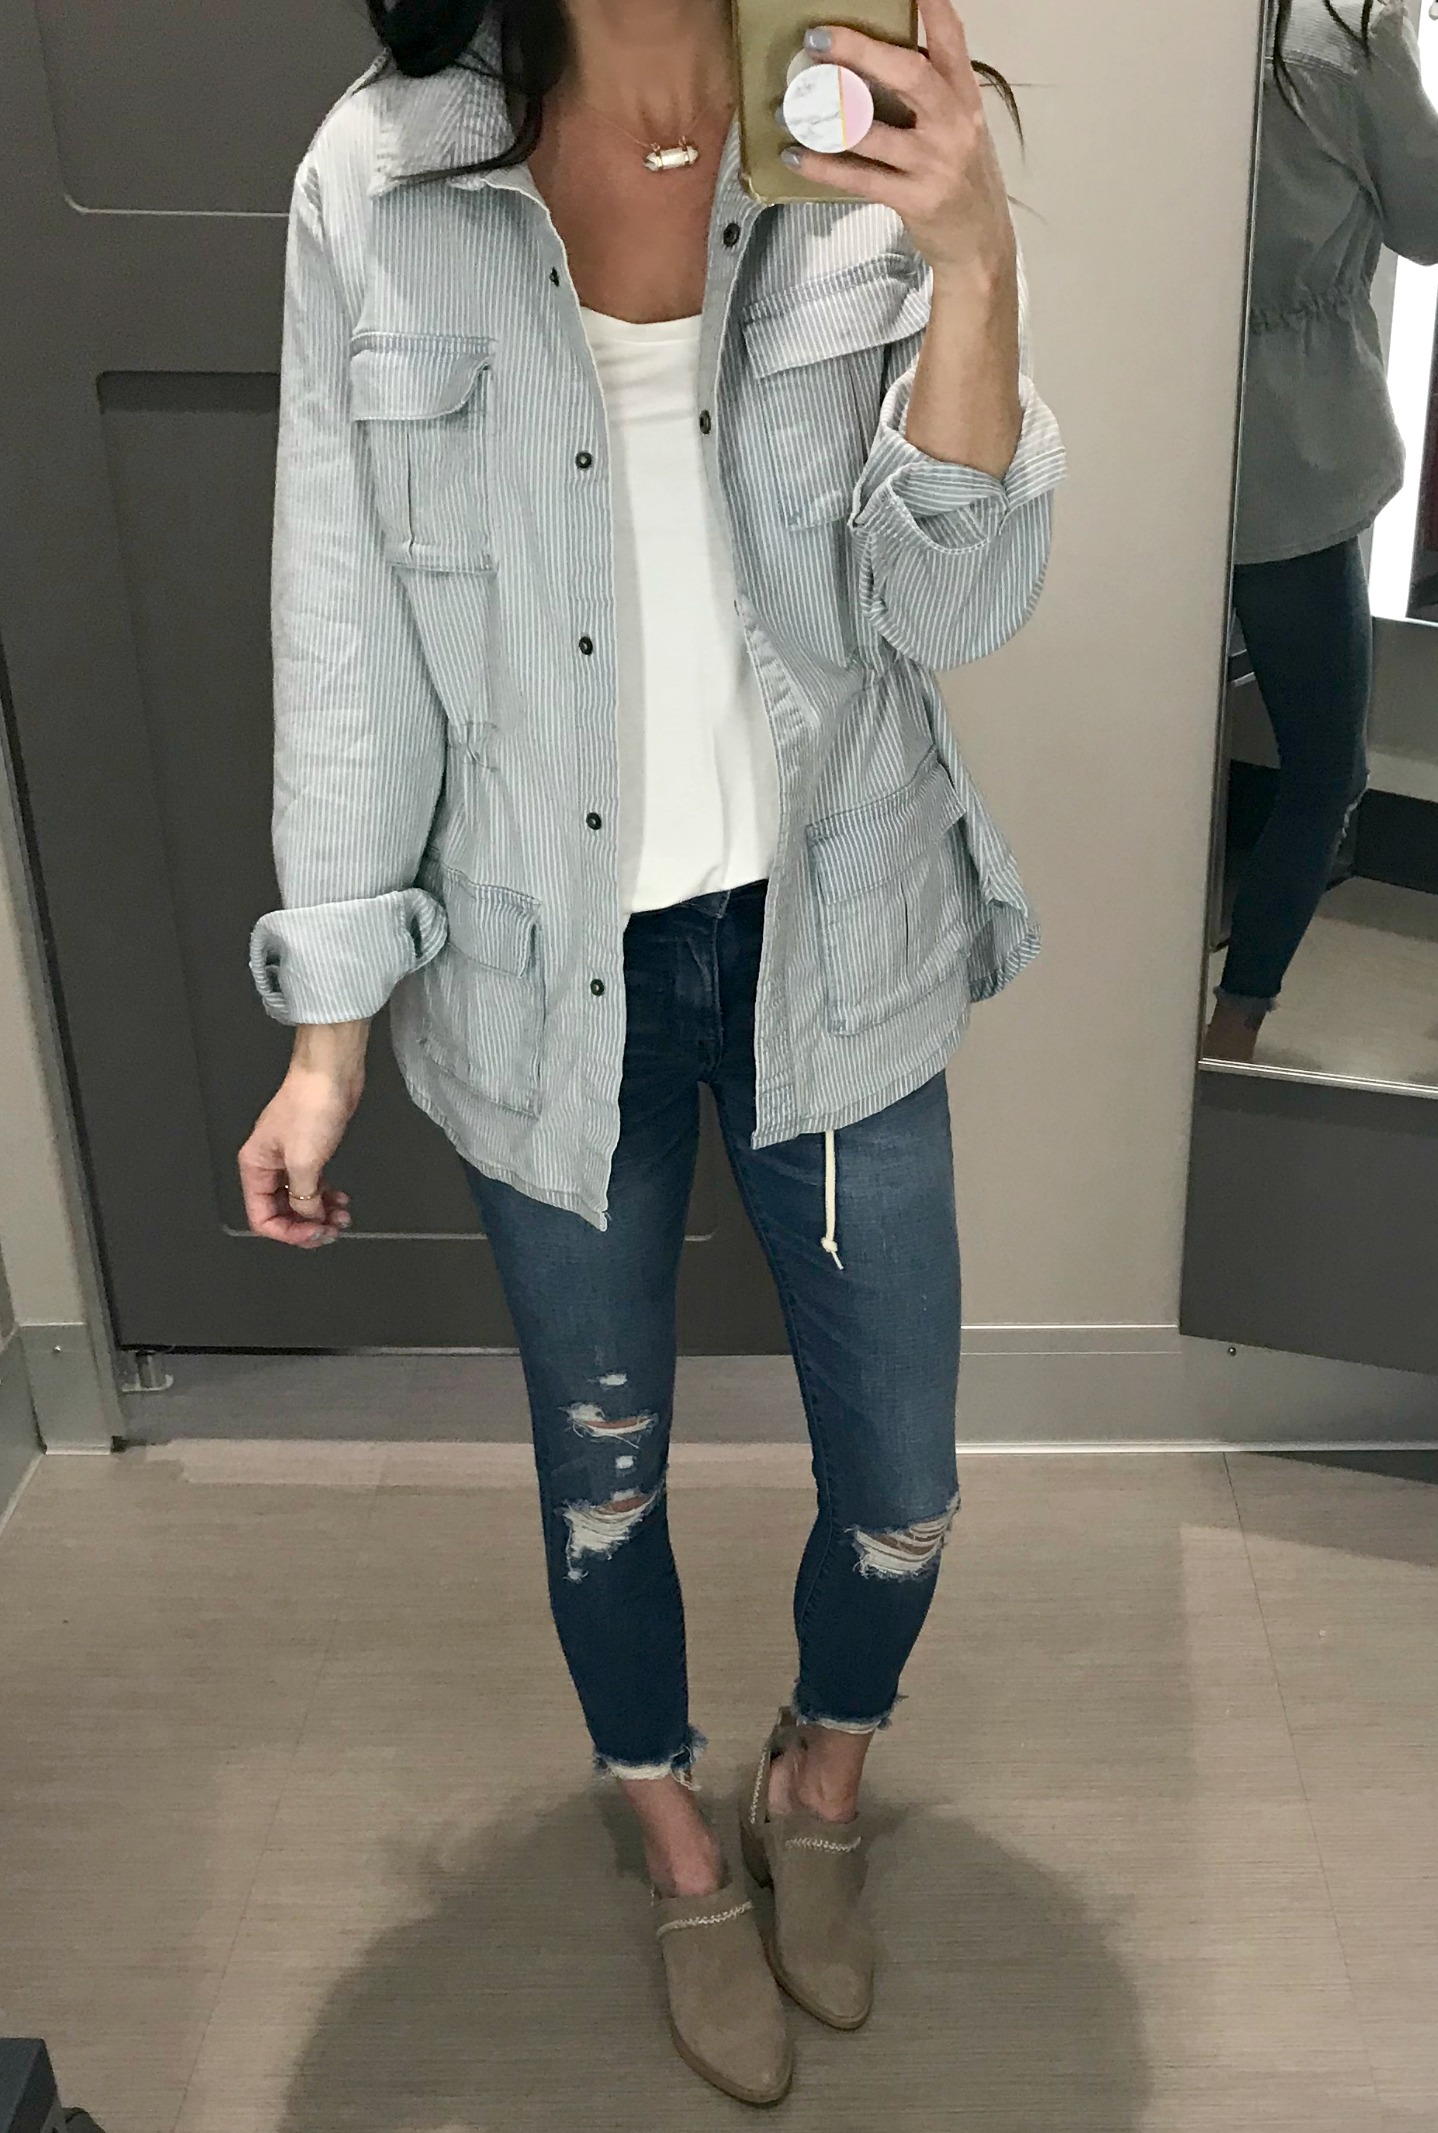 Jacket, cami, jeans, and booties